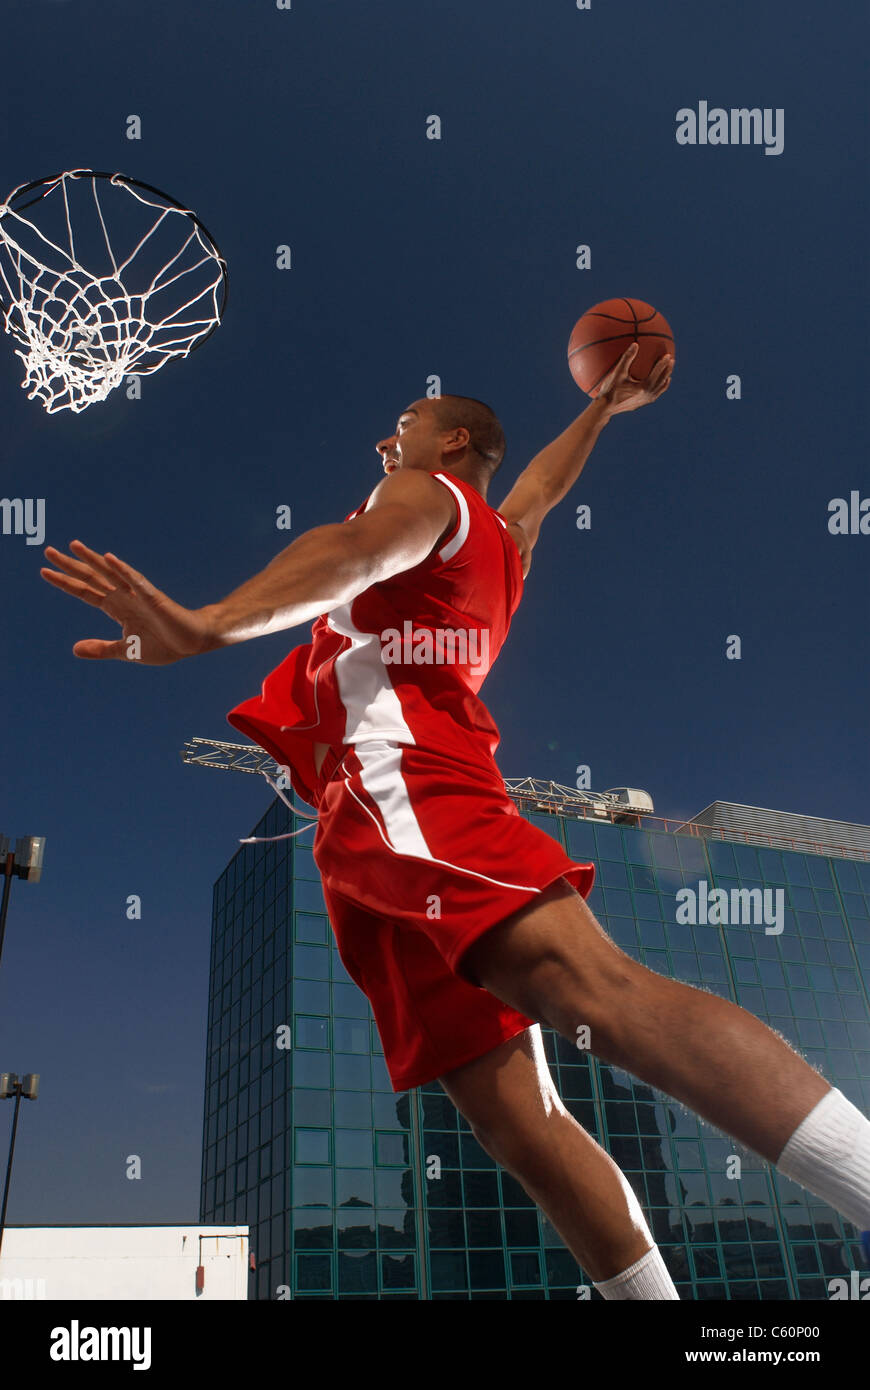 Basketball player about to dunk Stock Photo